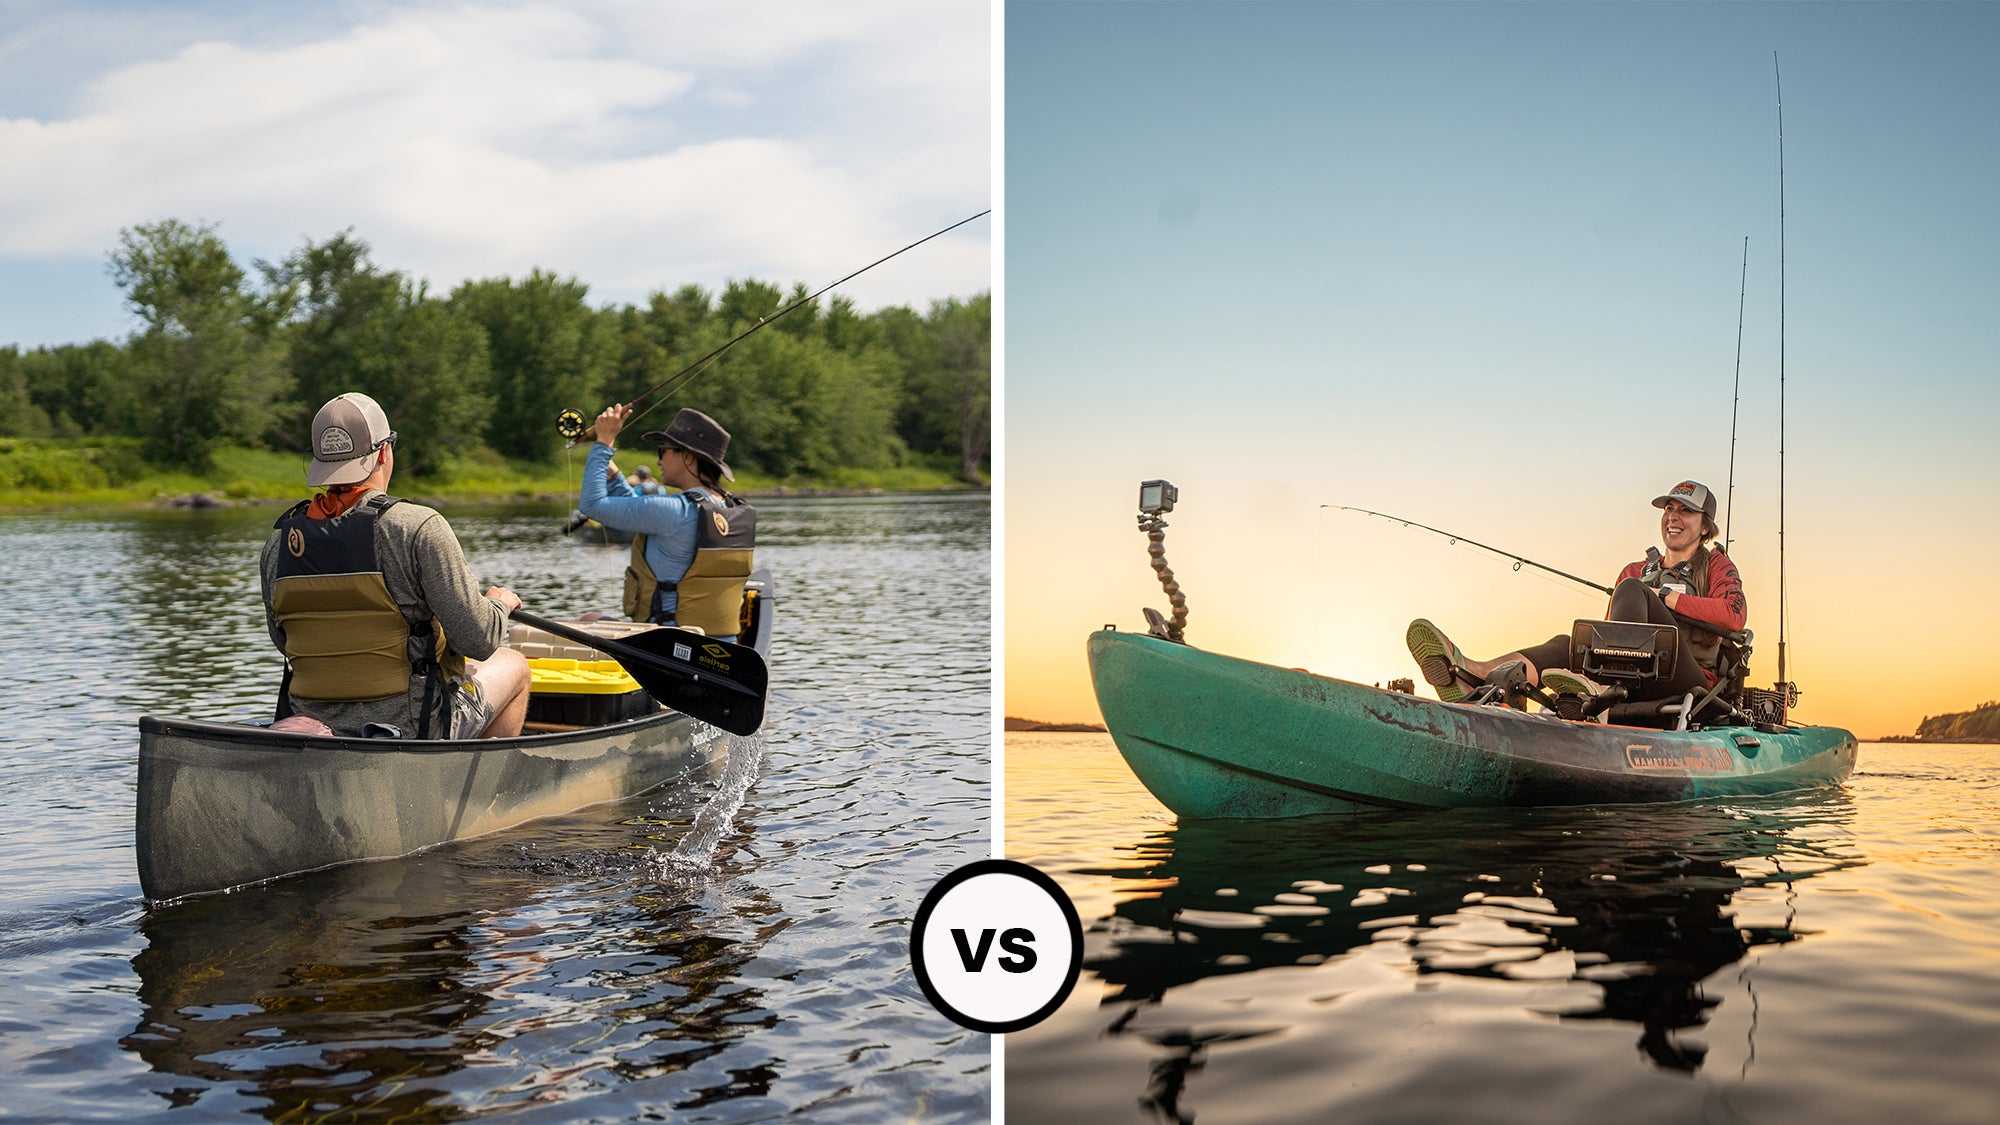 Canoe vs. Kayak: Which is Right for You?